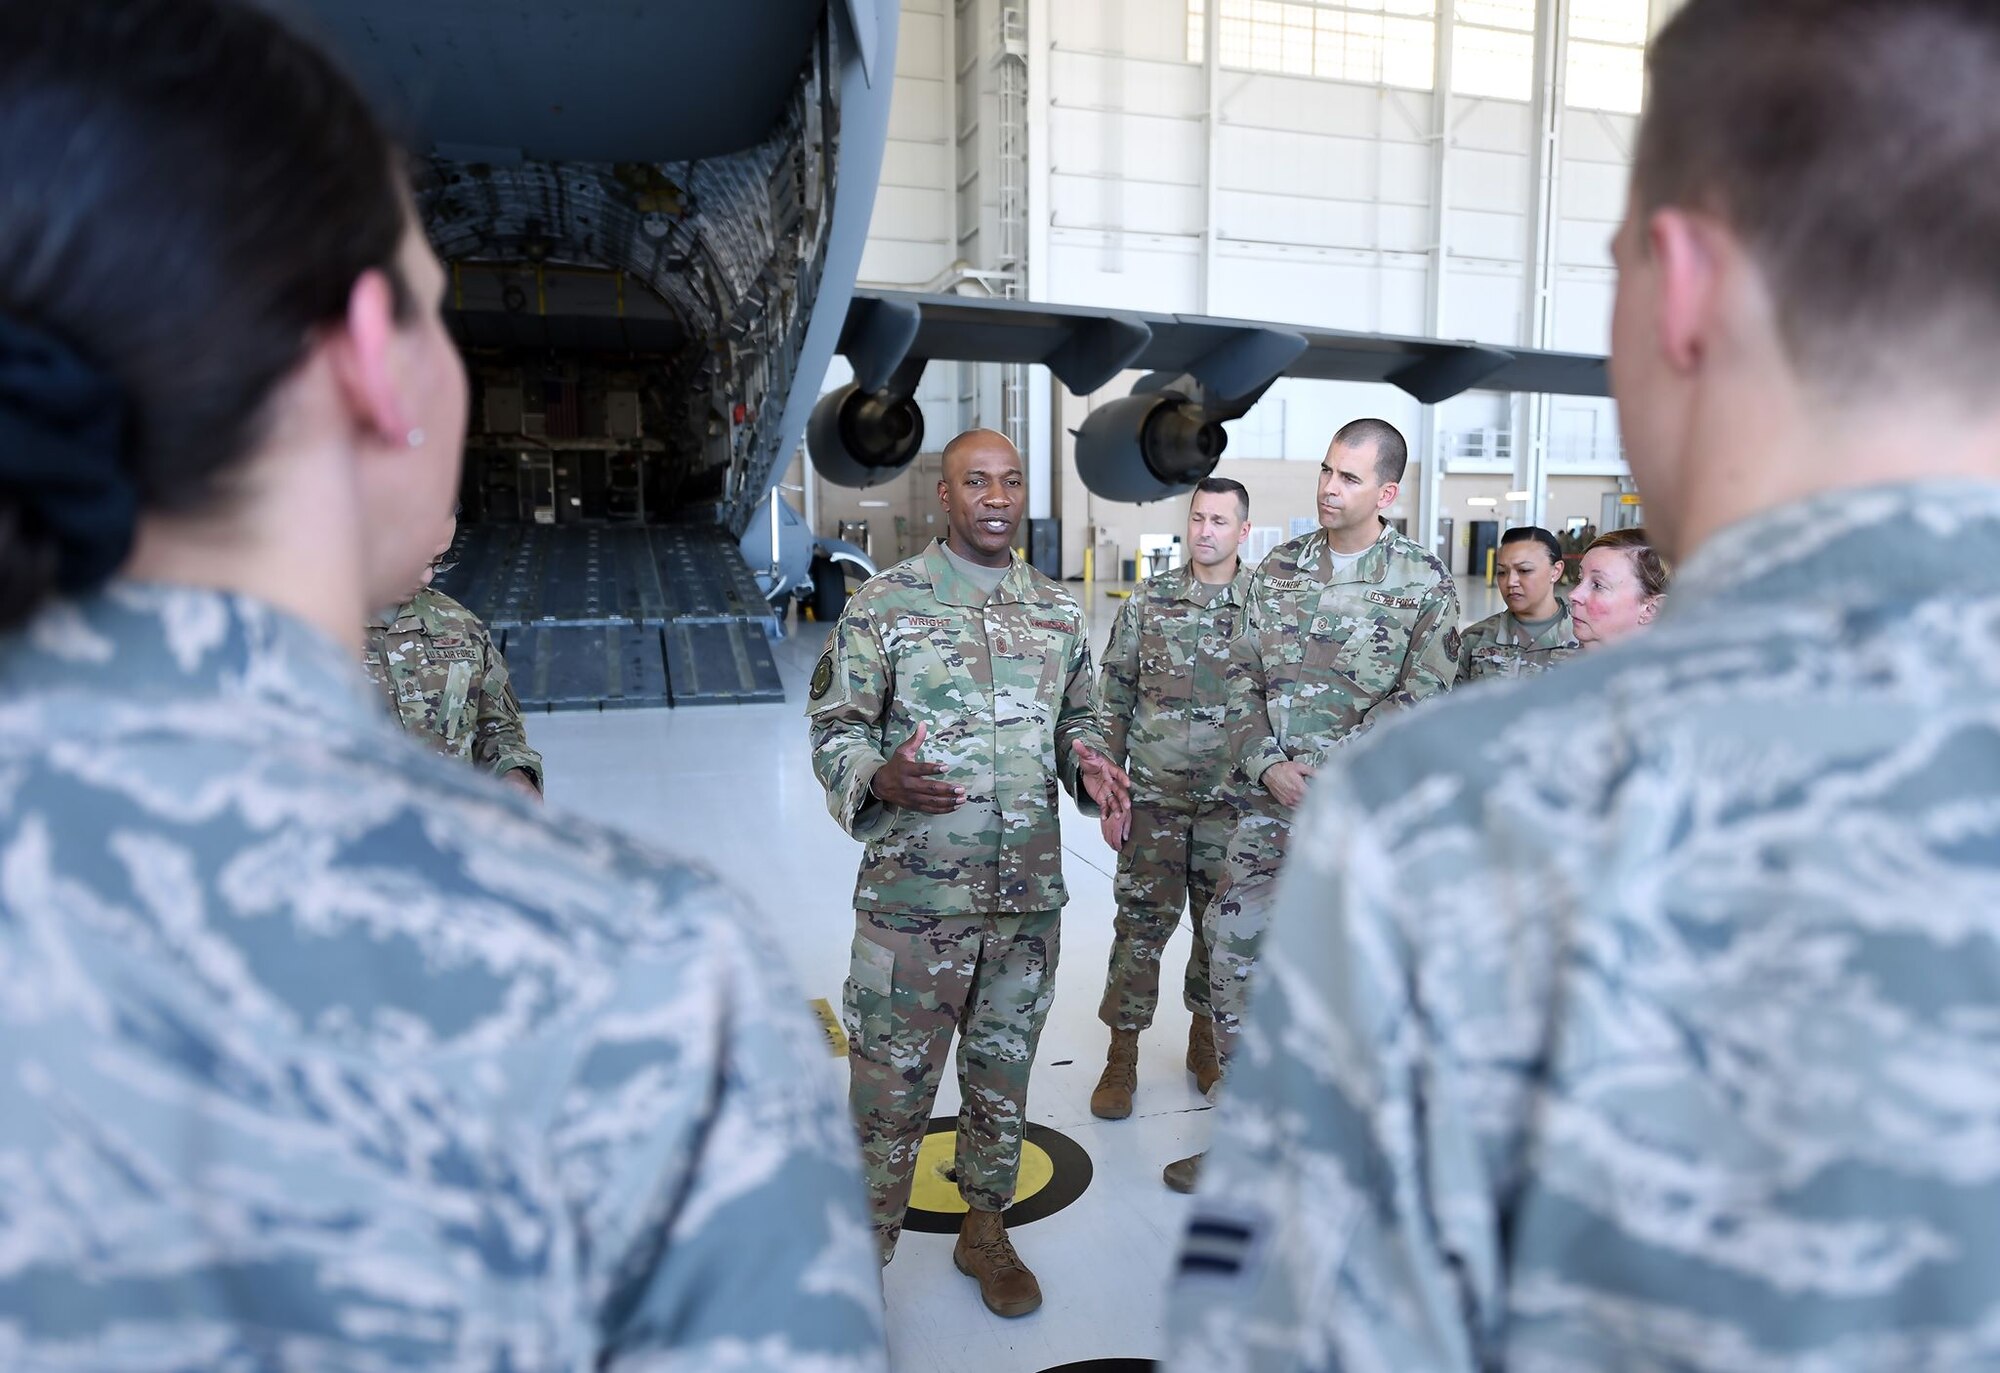 Chief Wright is surrounded by Airmen in an aircraft hangar. They're listening intently to what he's saying